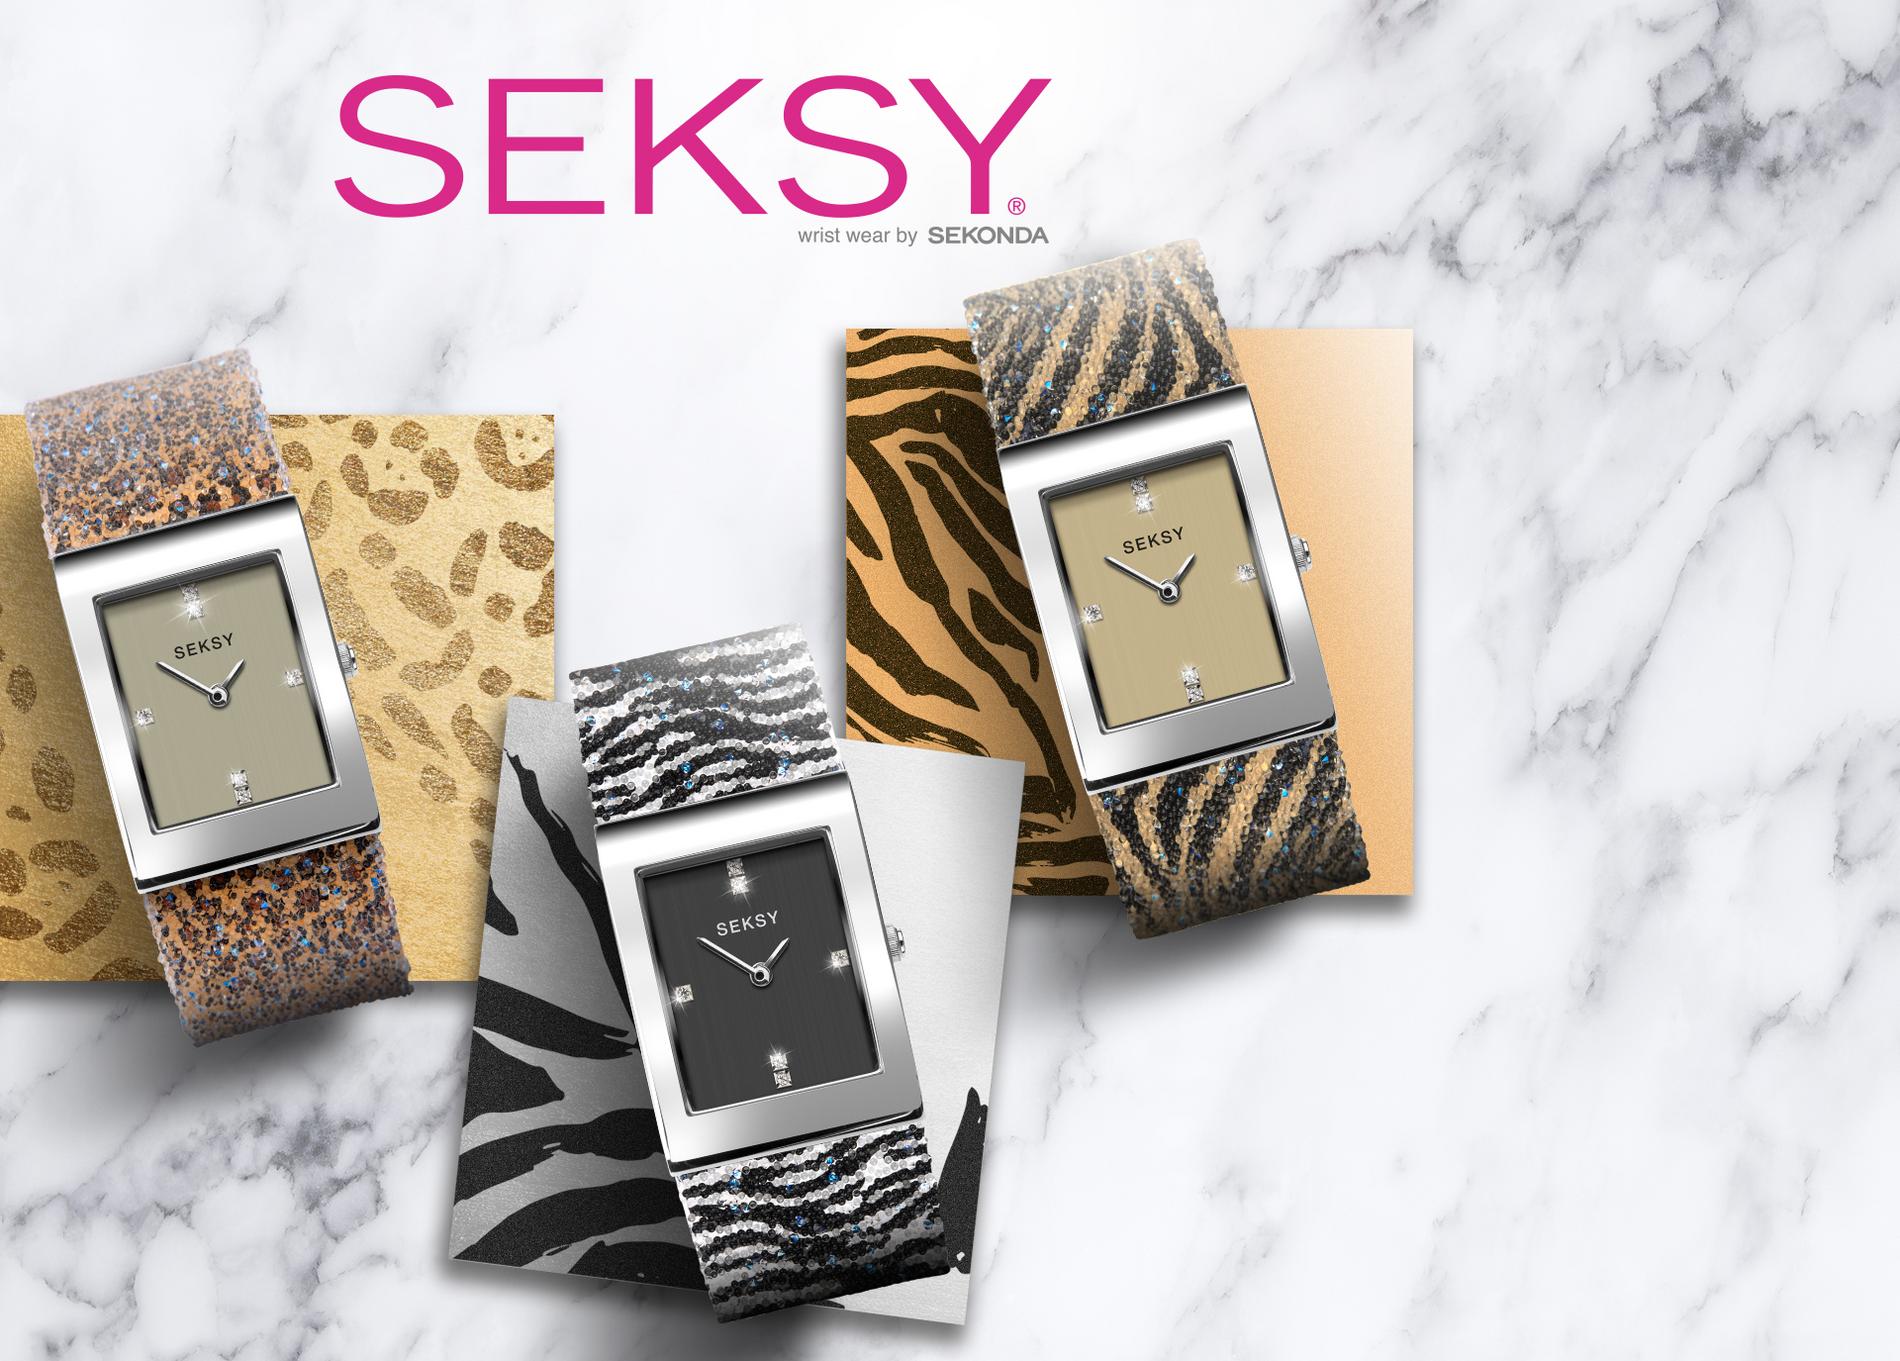 Summer Style with Seksy!